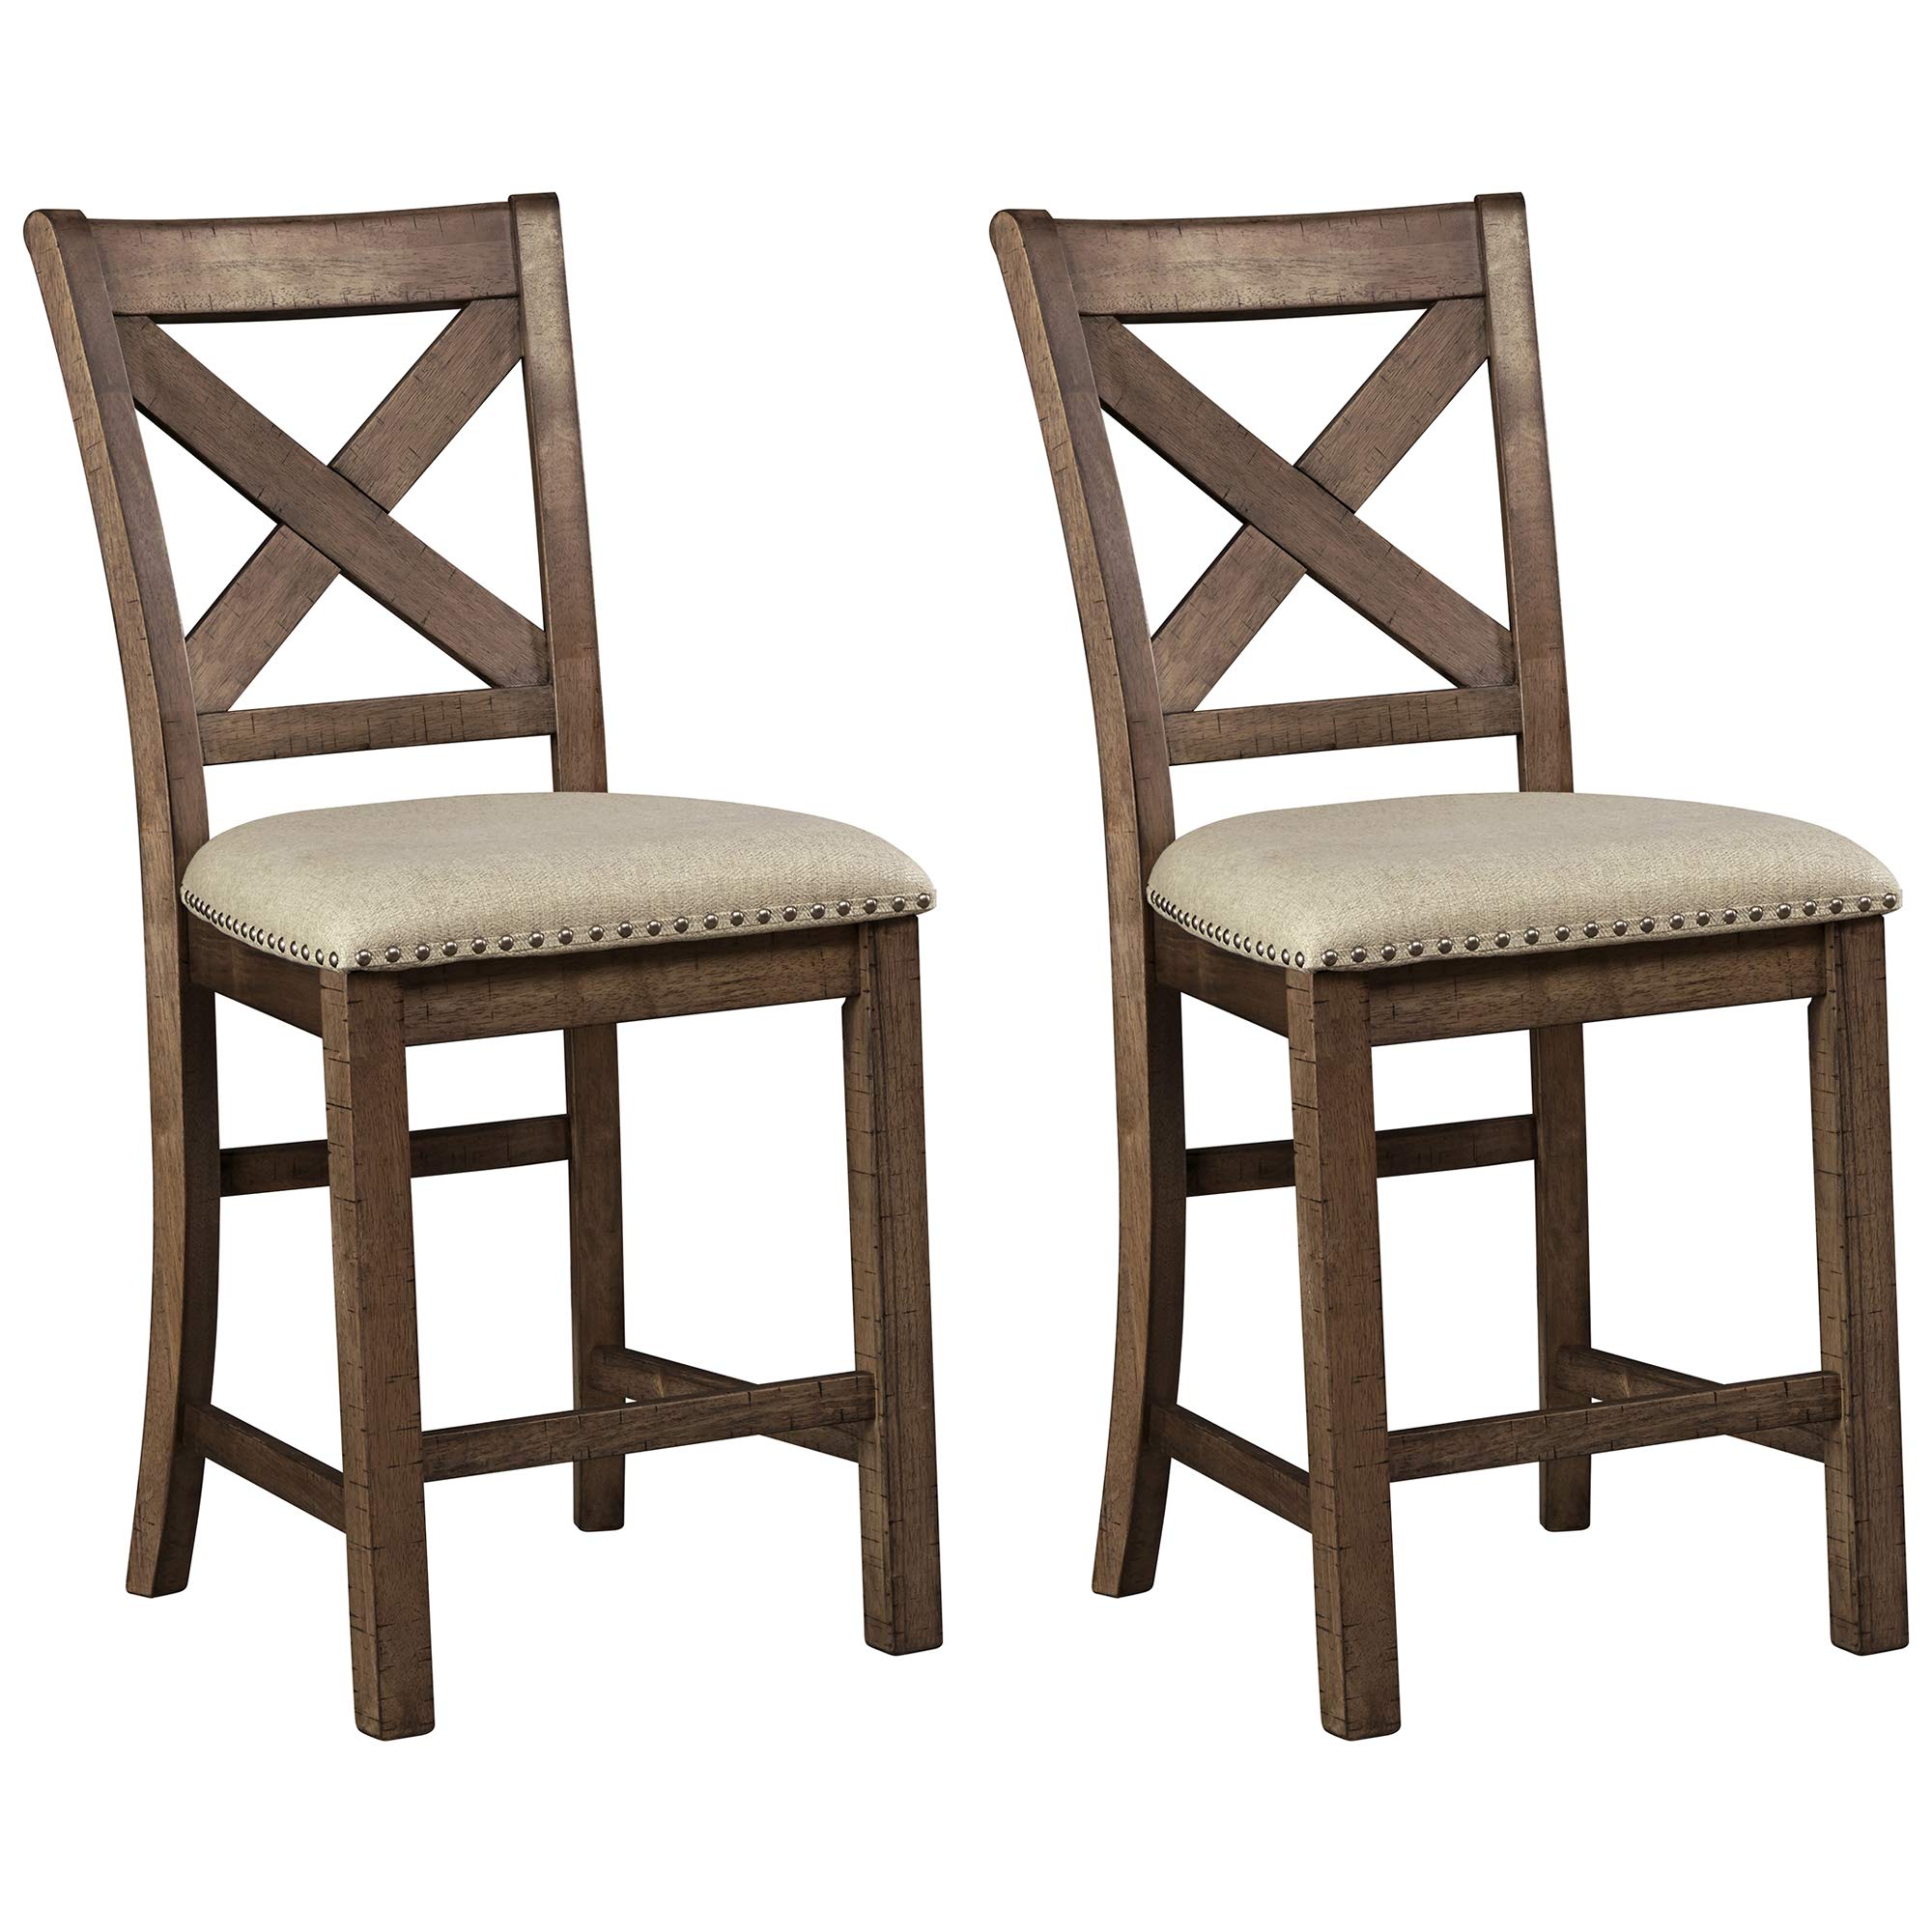 Signature Design by Ashley Moriville Rustic Farmhouse 24.5" Upholstered Barstool, 2 Count, Beige & Brown